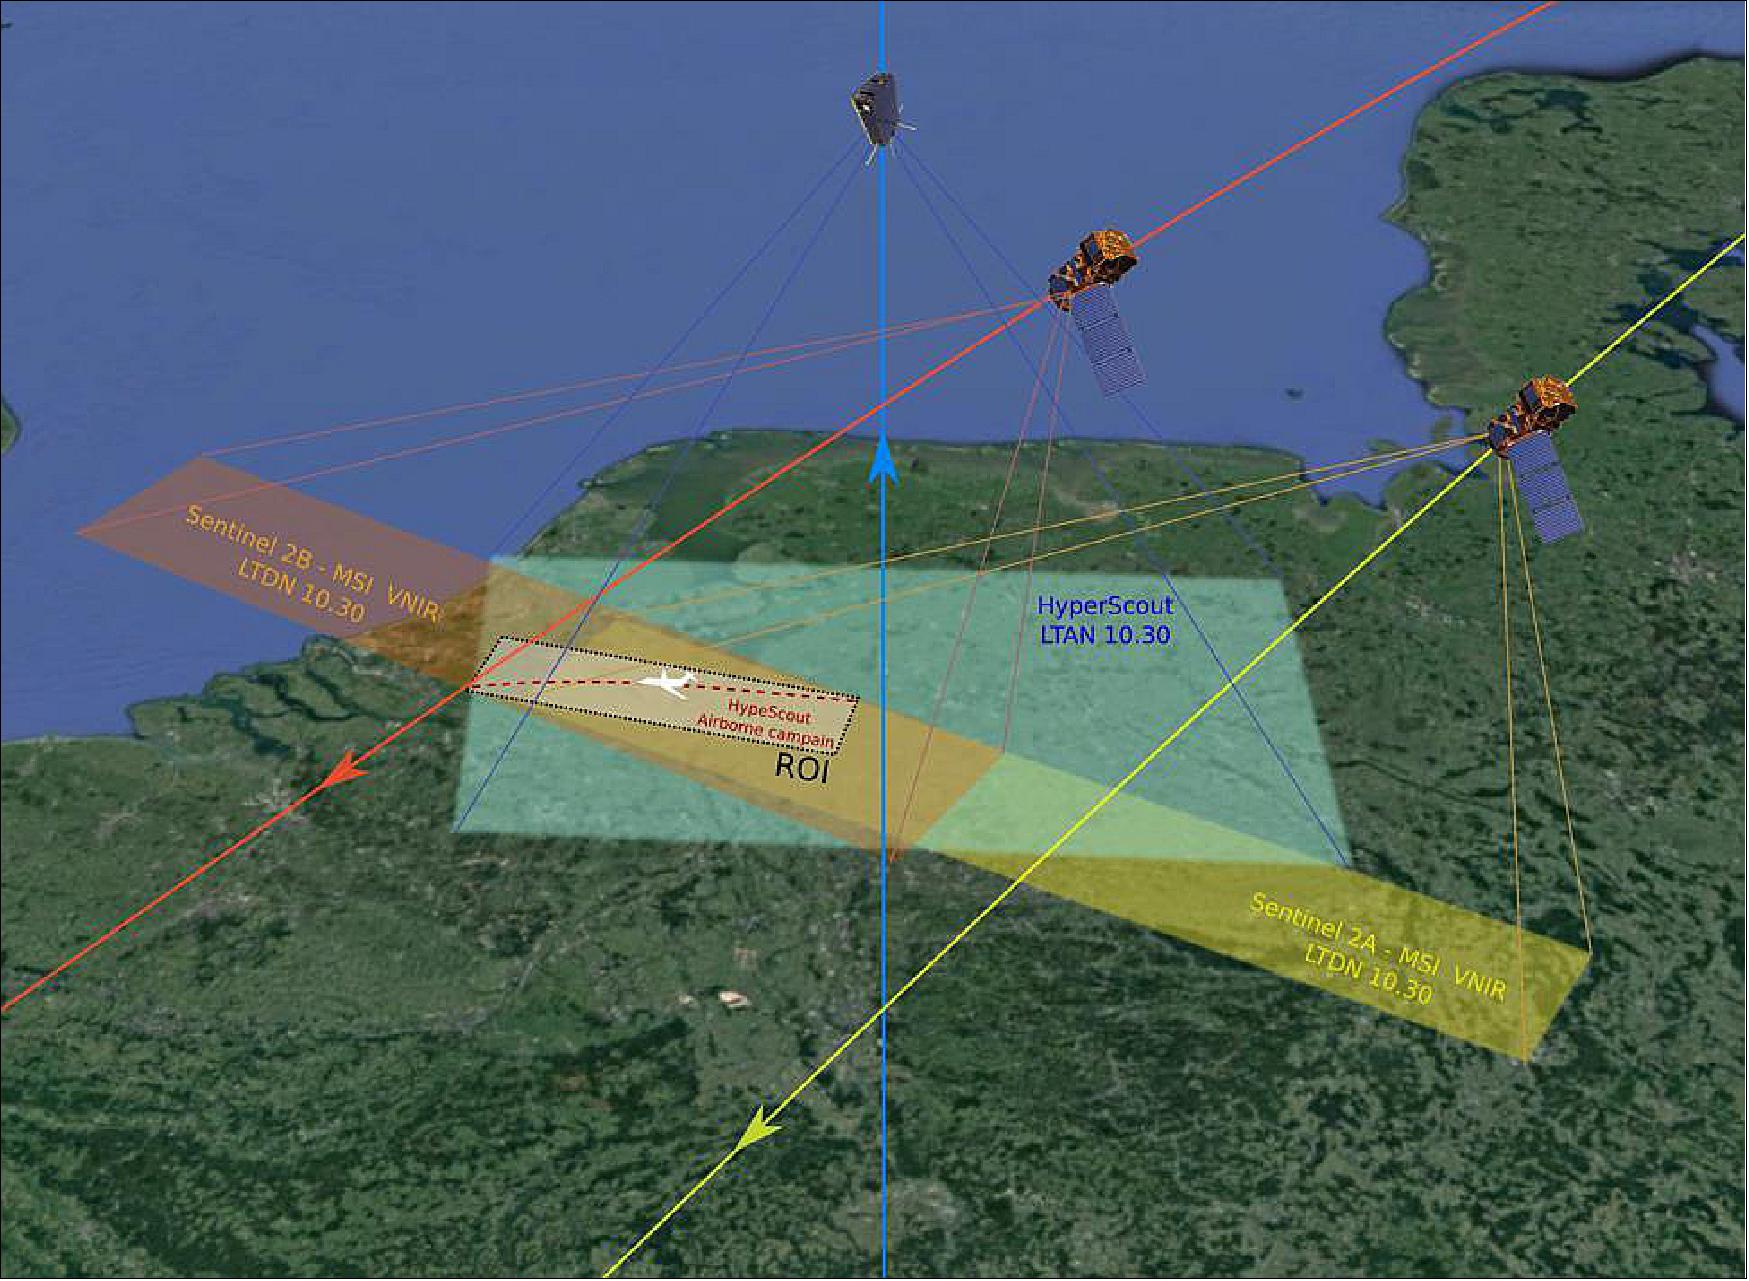 Figure 6: Diagram of a cross acquisition between HyperScout and Sentinel satellites. Given the 180º separation between the Sentinel-2A and Sentinel-2B orbit, the crossed acquisition with HyperScout can be performed with only one Sentinel at the time (image credit: cosine Remote Sensing, ESA/ESTEC)